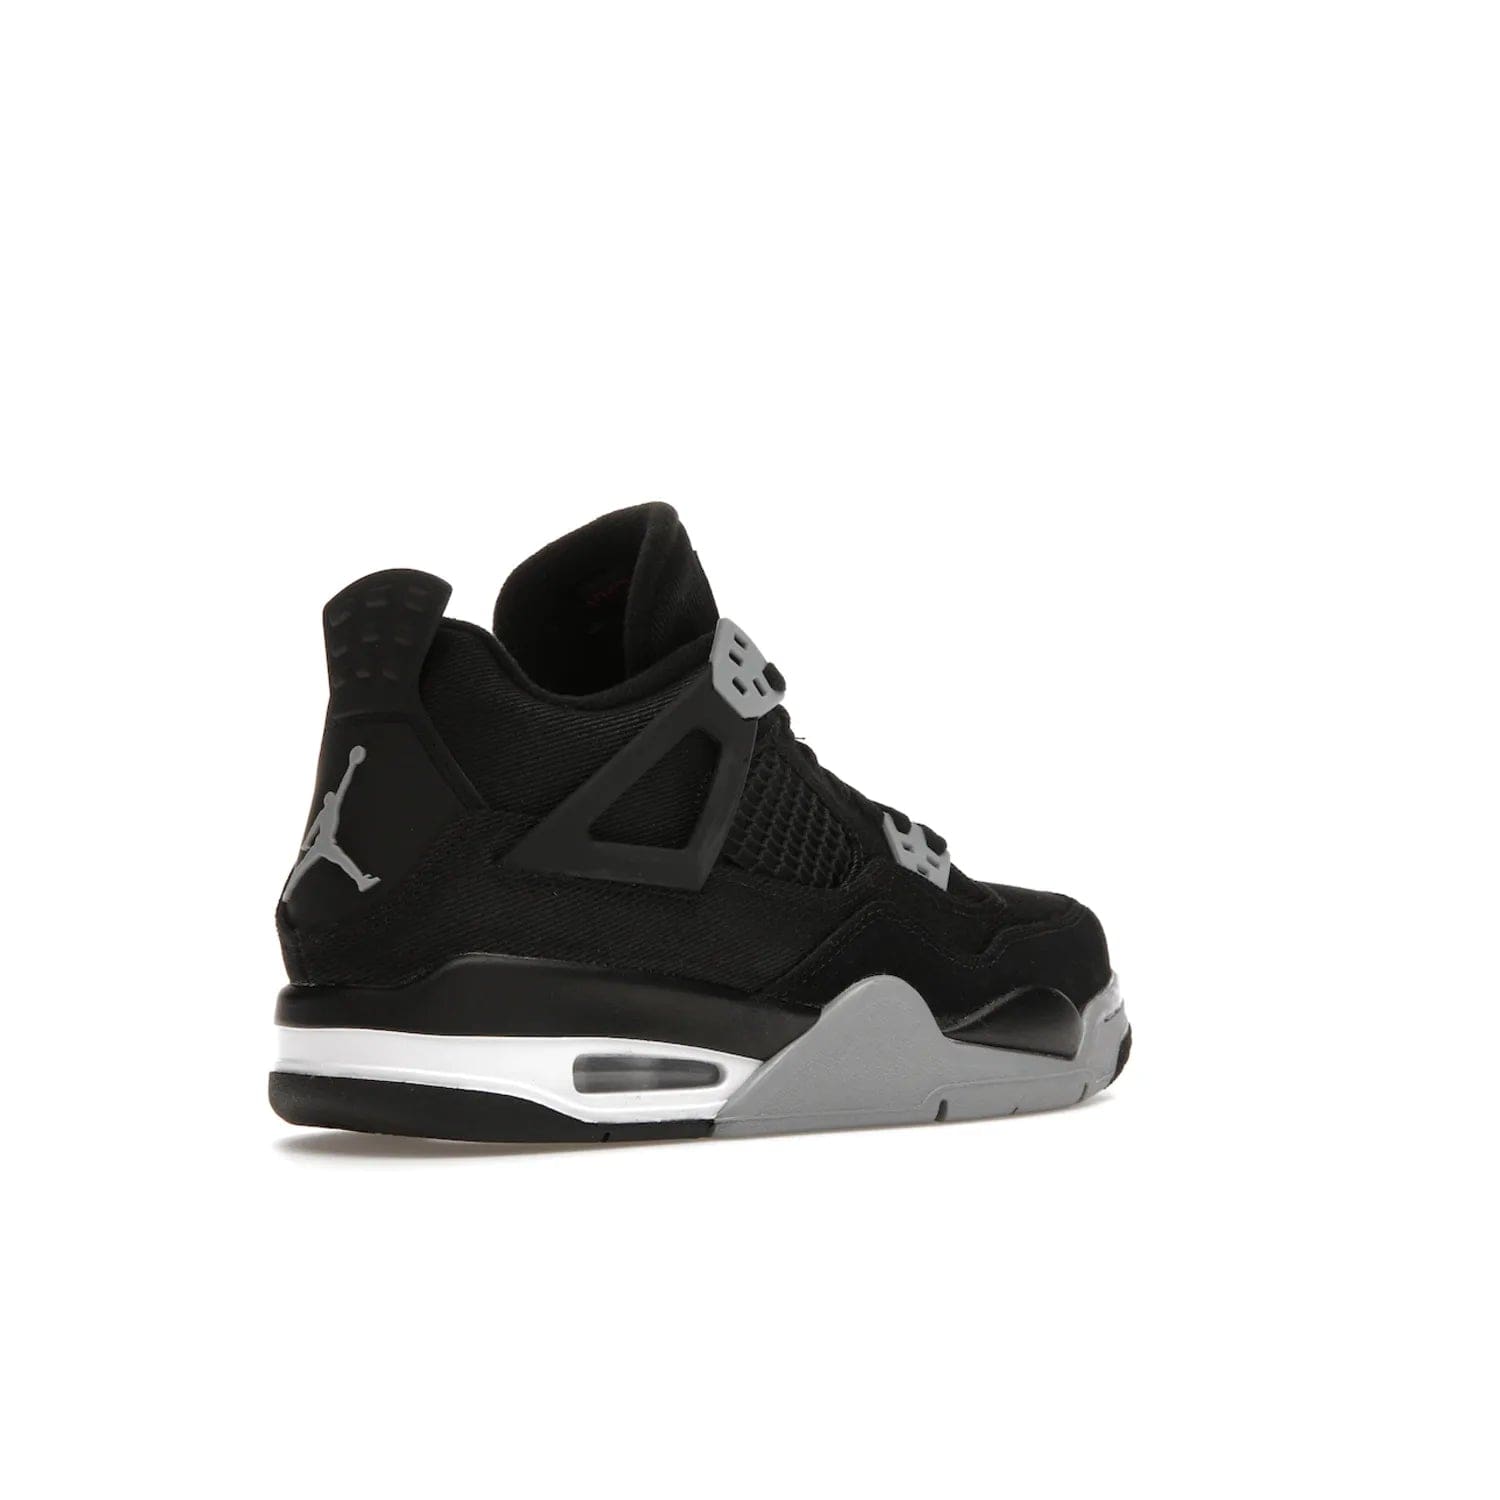 Jordan 4 Retro Black Canvas (GS) - Image 33 - Only at www.BallersClubKickz.com - Premium Air Jordan 4 Retro Black Canvas in grade-schooler's catalog. Featuring black suede canvas upper, grey molding, accents in red, white midsole, woven Jumpman tag, & visible AIR cushioning. Releasing Oct. 1, 2022.